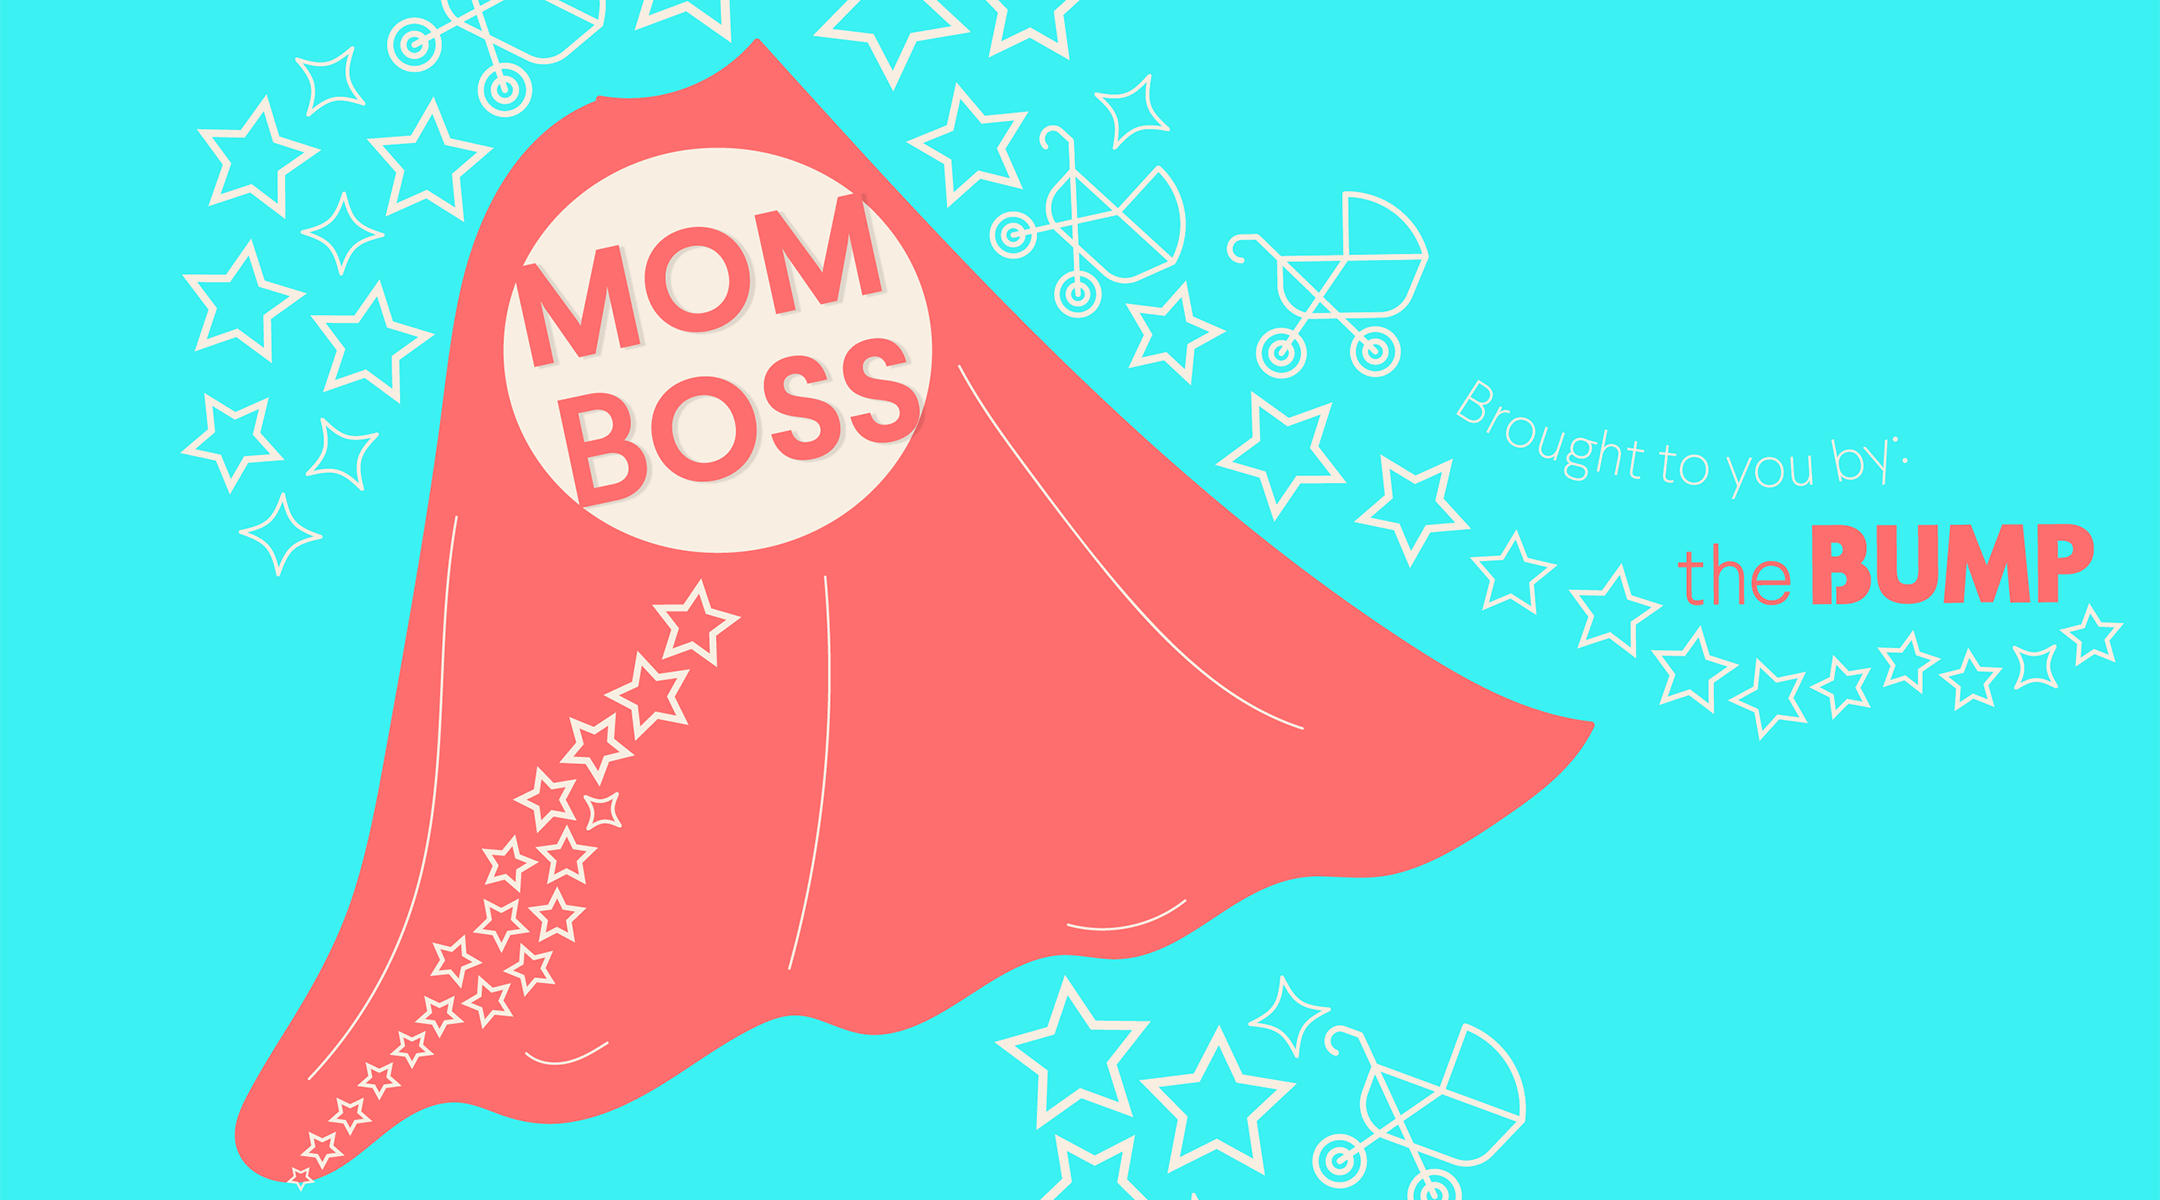 mom boss series represented by illustrated cape and stars